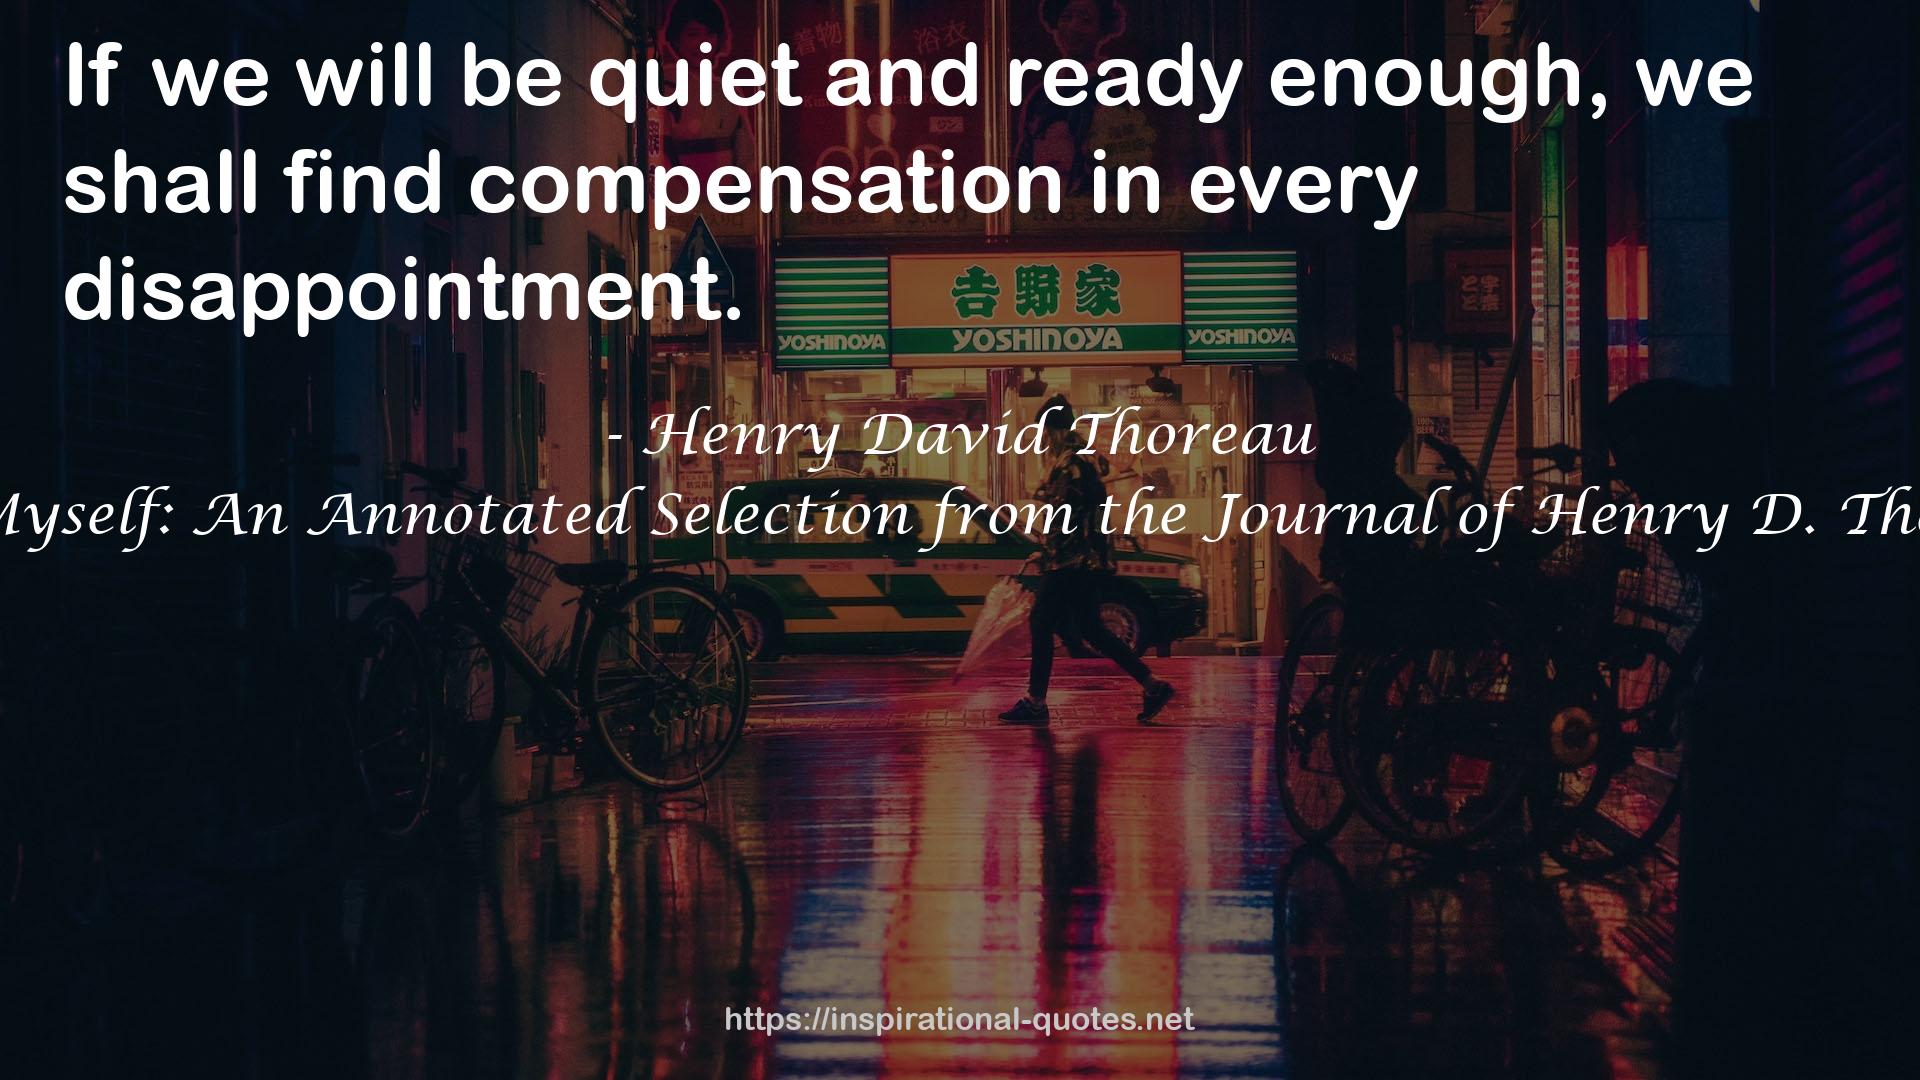 I to Myself: An Annotated Selection from the Journal of Henry D. Thoreau QUOTES